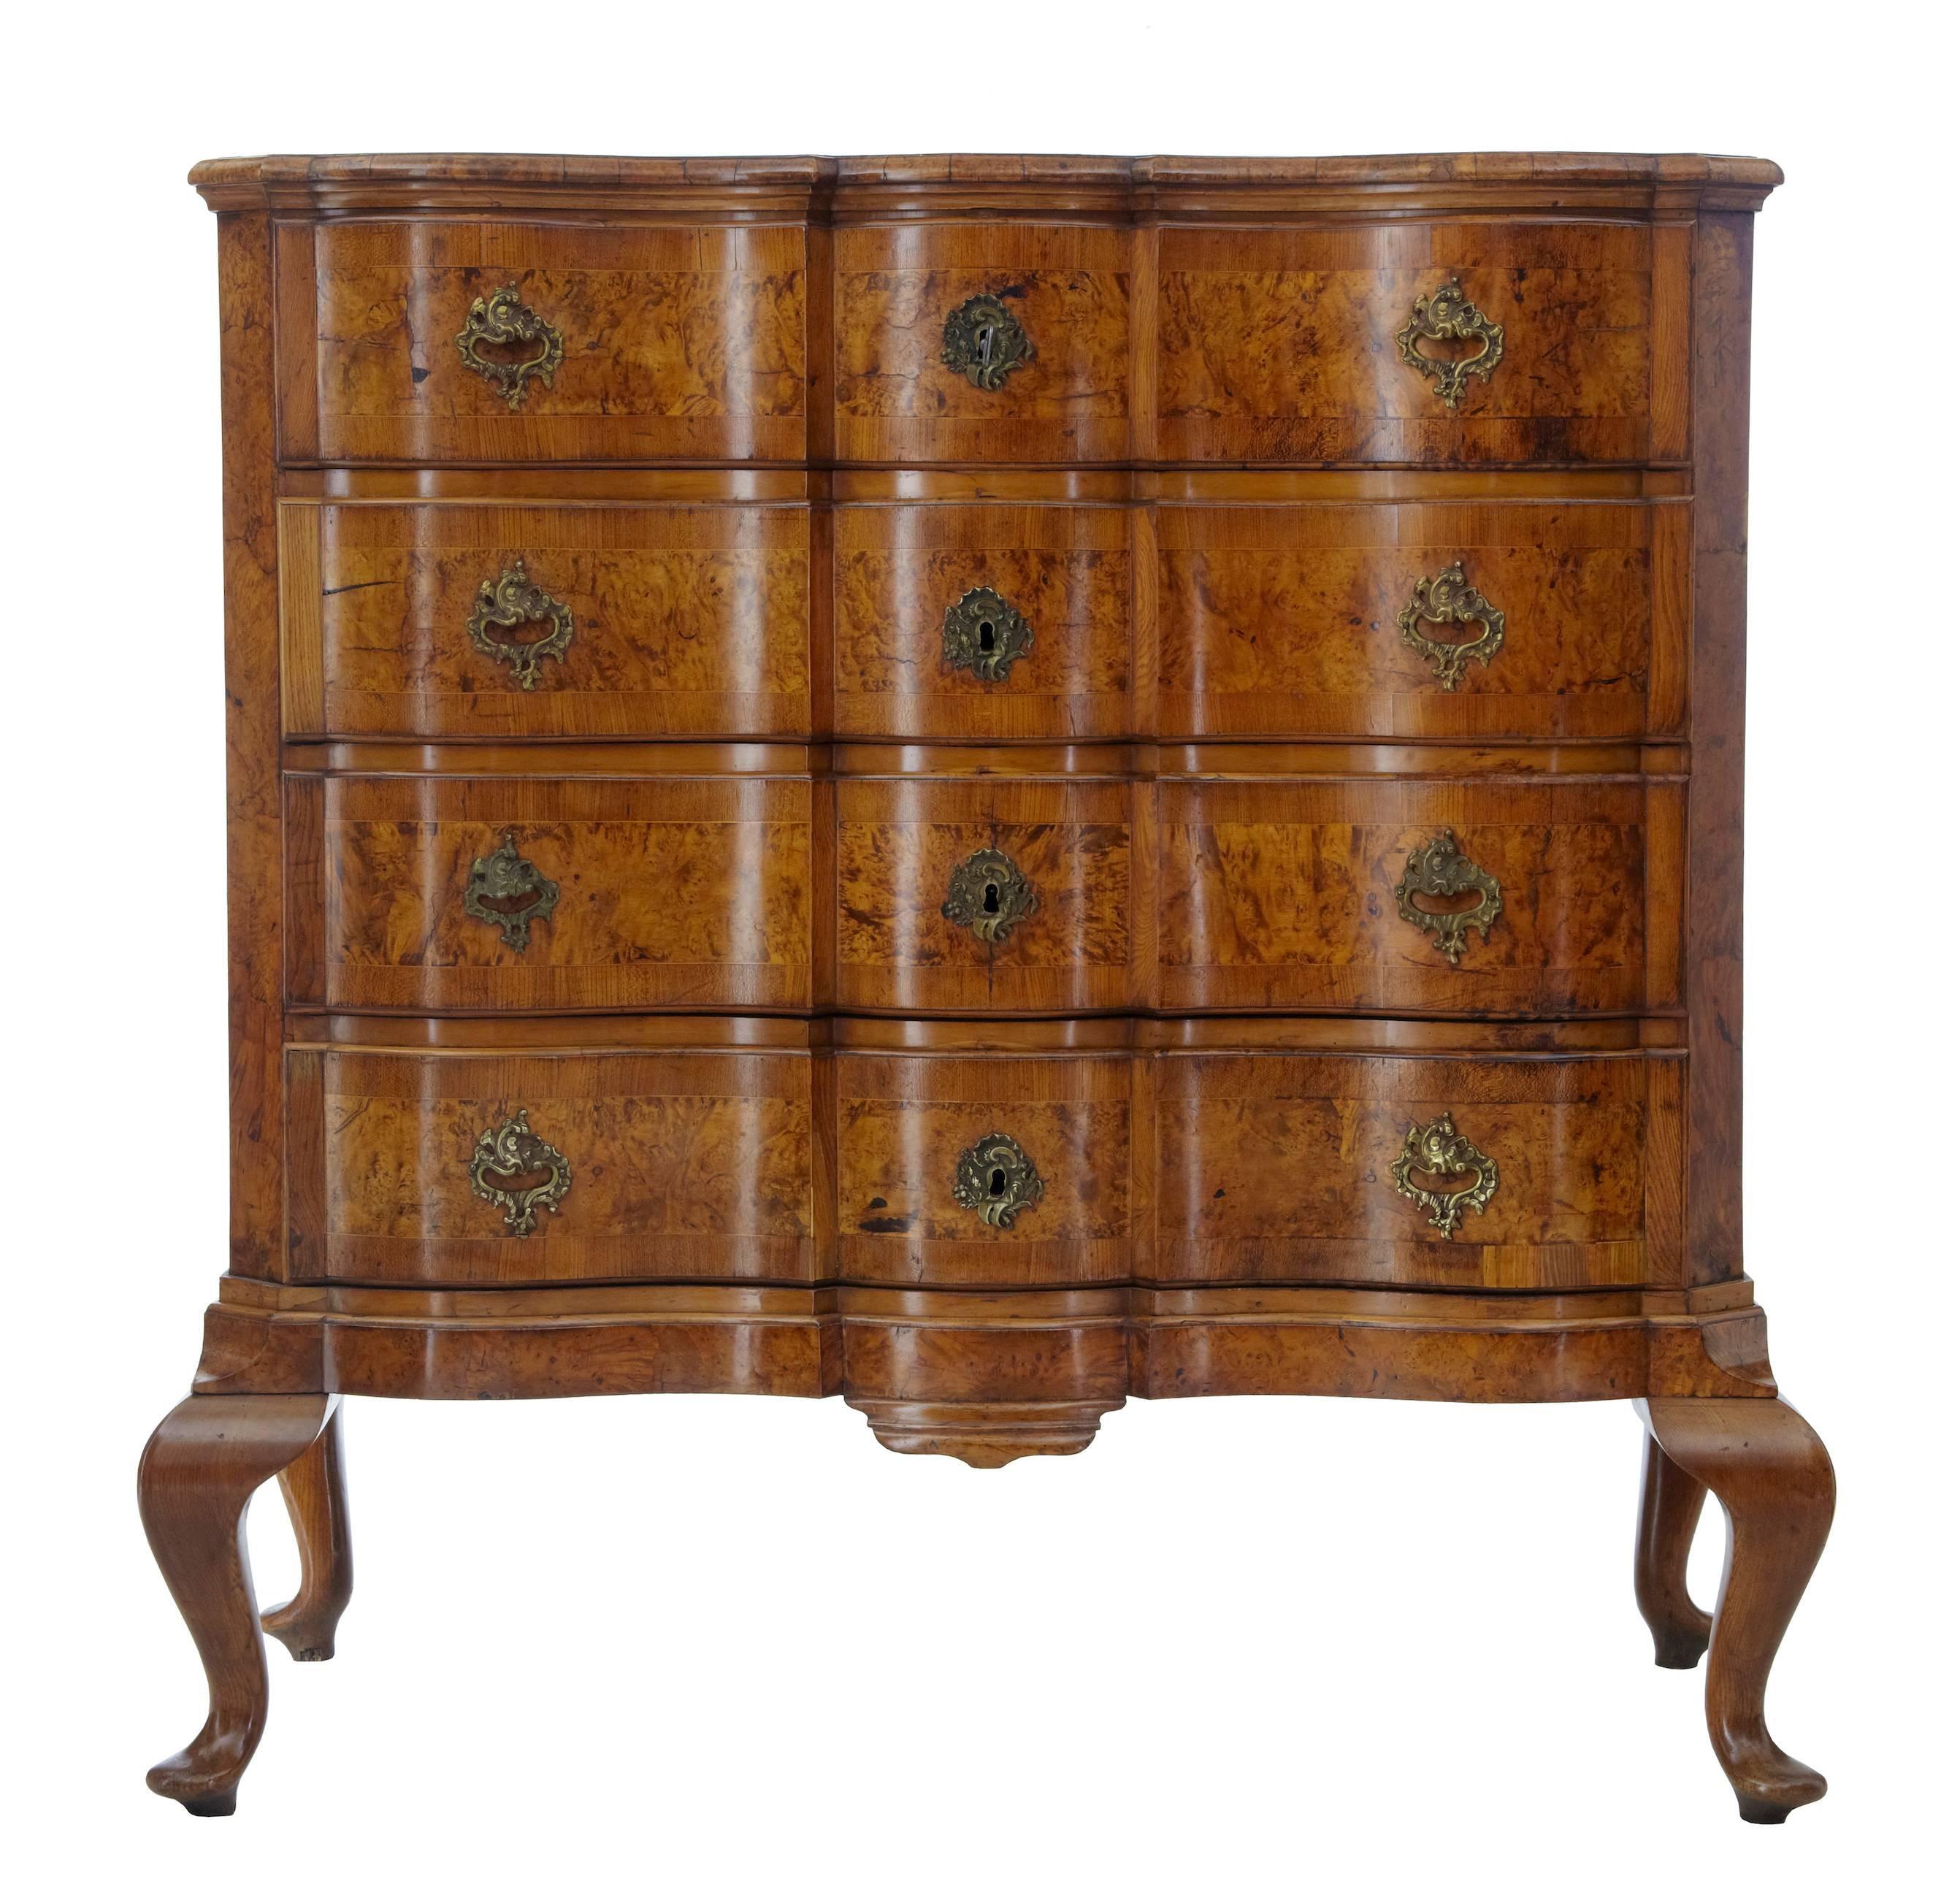 Stunning looking Danish alder root and walnut chest on stand, circa 1750.
Two part chest with the legs being separate.
Beautiful colour and use of the unusual alder root.
Four serpentine shaped front drawers with working locks and key.
Replaced